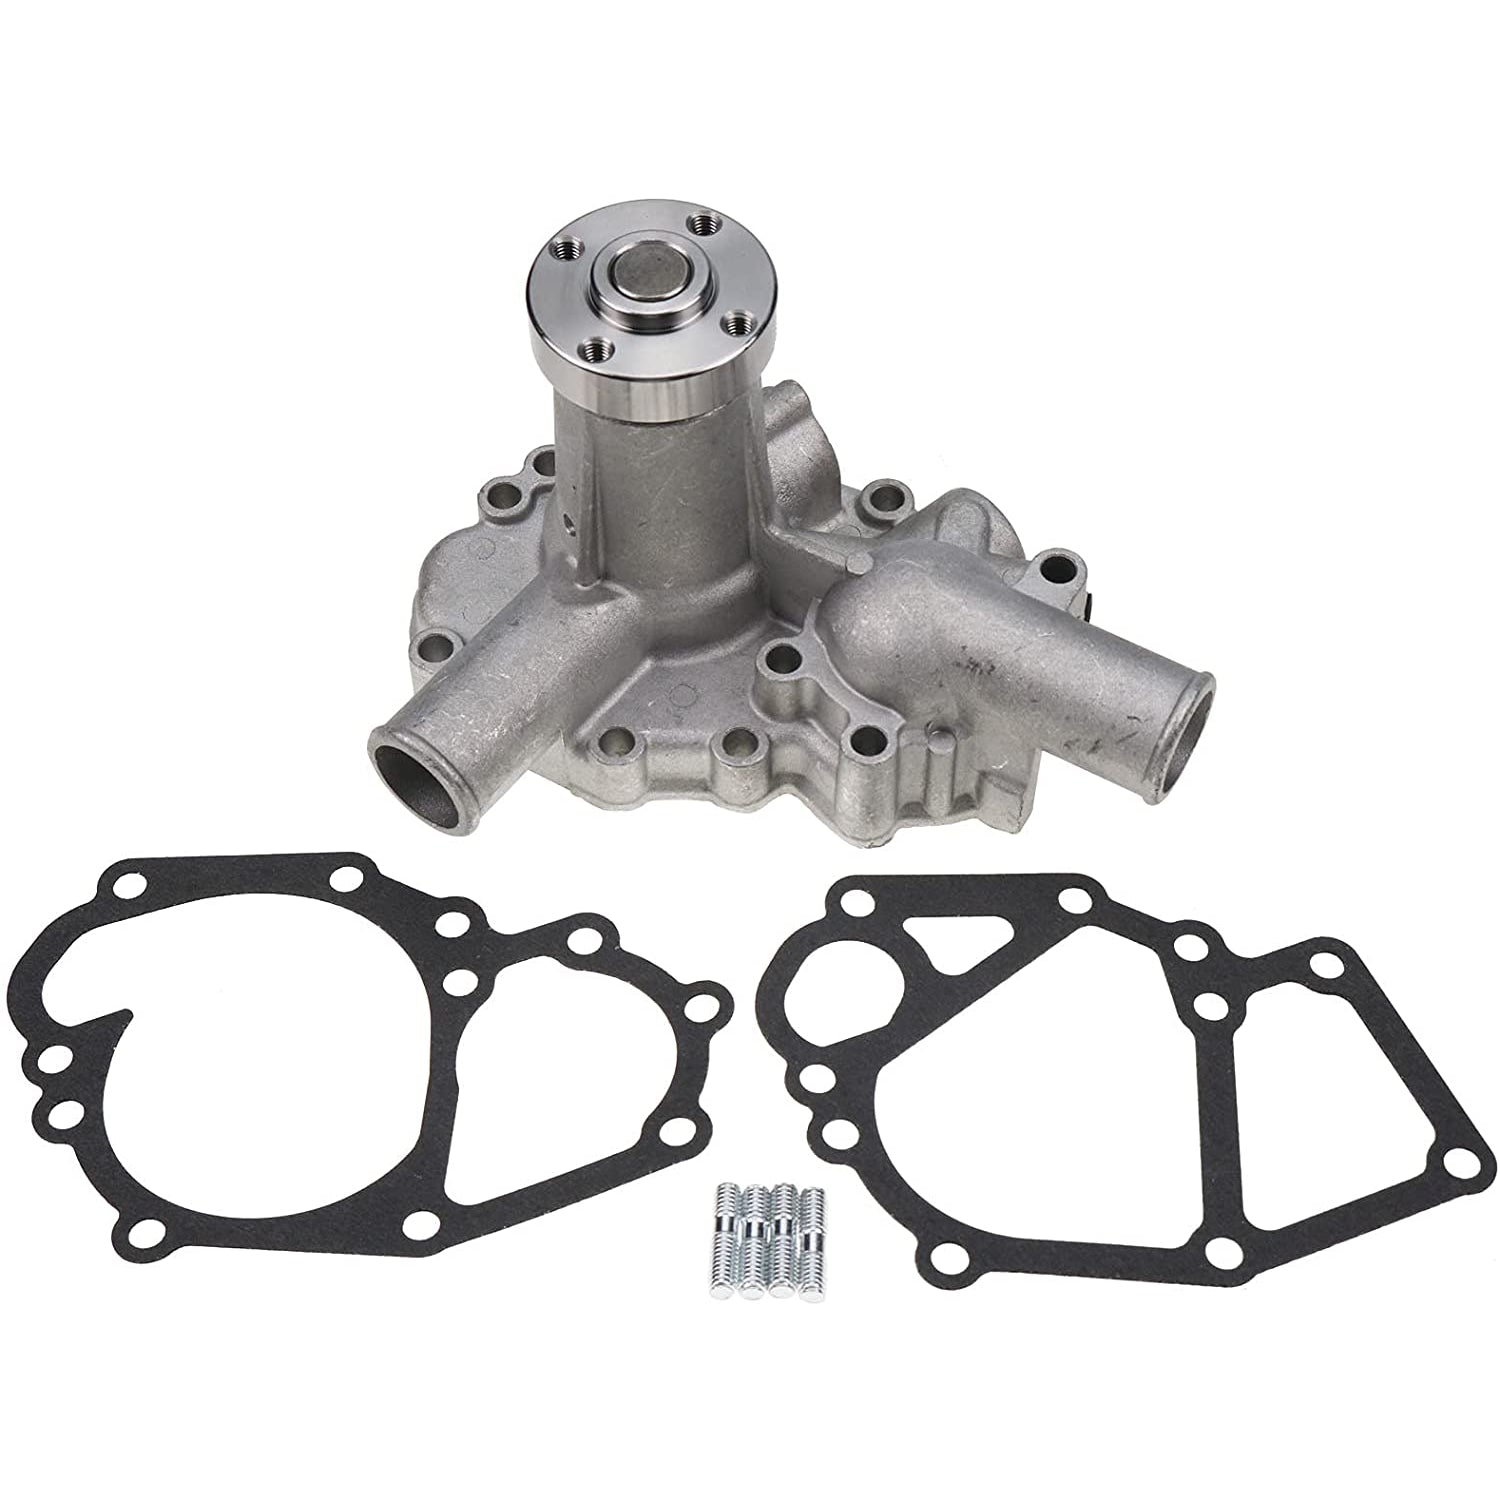 Water Pump with Gaskets 83989003 SBA145017300 Compatible with Ford New Holland Compact Tractors 1120 1310 1215 1210 1220 Skid Steer CL25 Shibaura S753 S723 SP1500 SP1540 SP1700 SP1740 P15